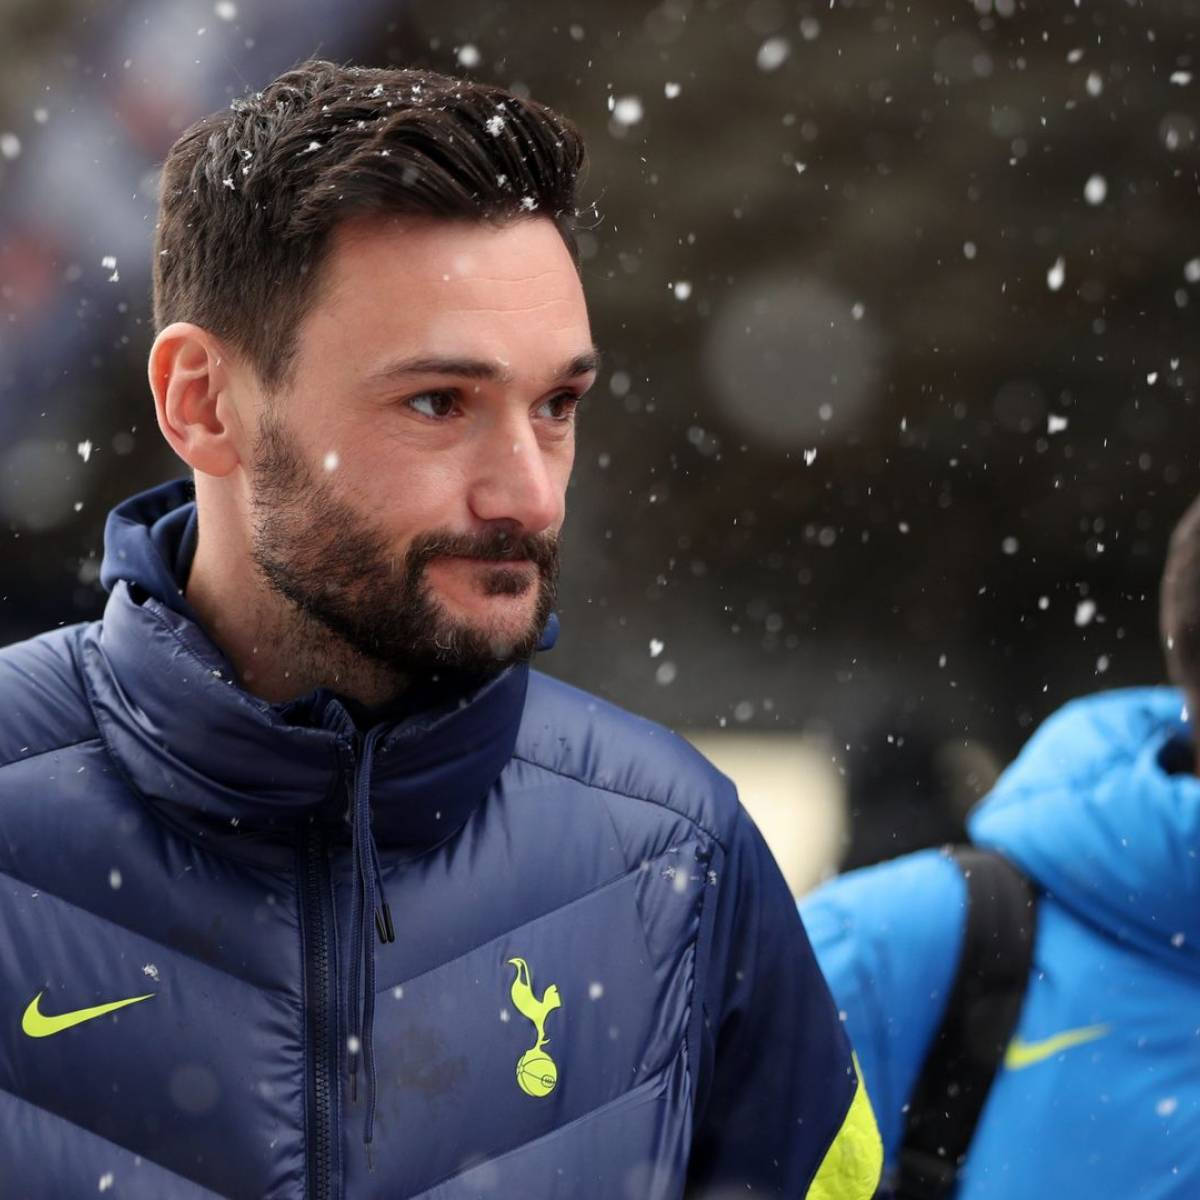 Hugo Lloris - The Goalkeeper Star Standing Confidently On A Snowy Day Background